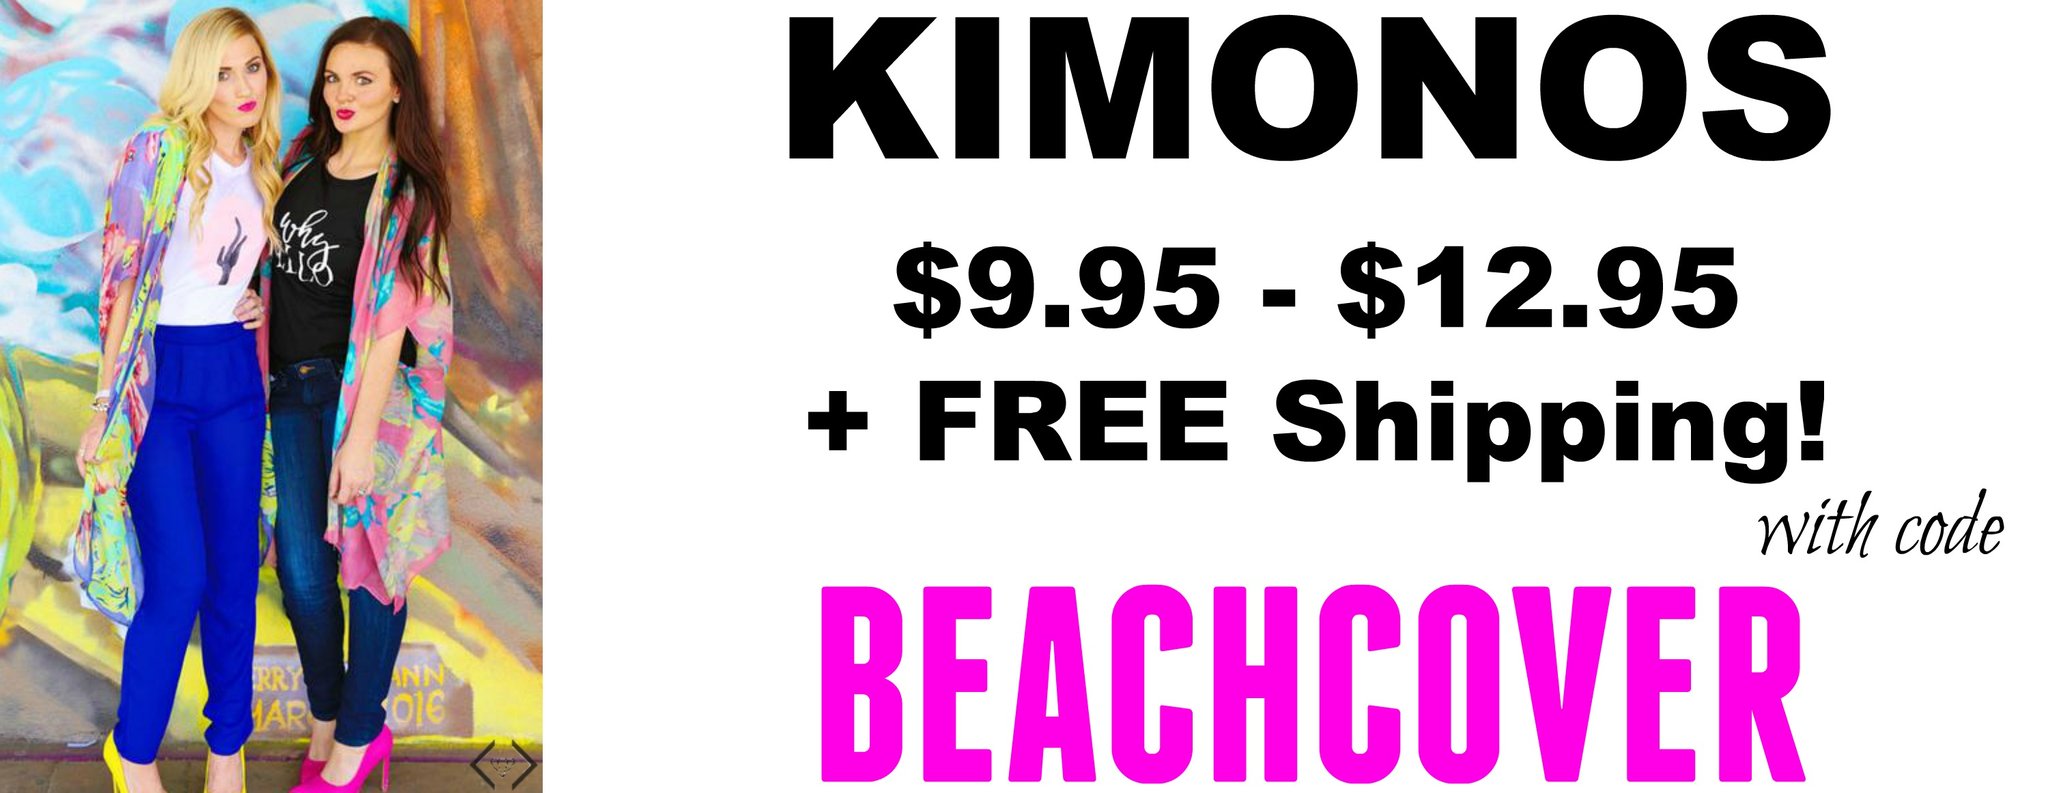 Lightweight Kimonos From $9.95 Shipped Today! Great Beach Coverups!